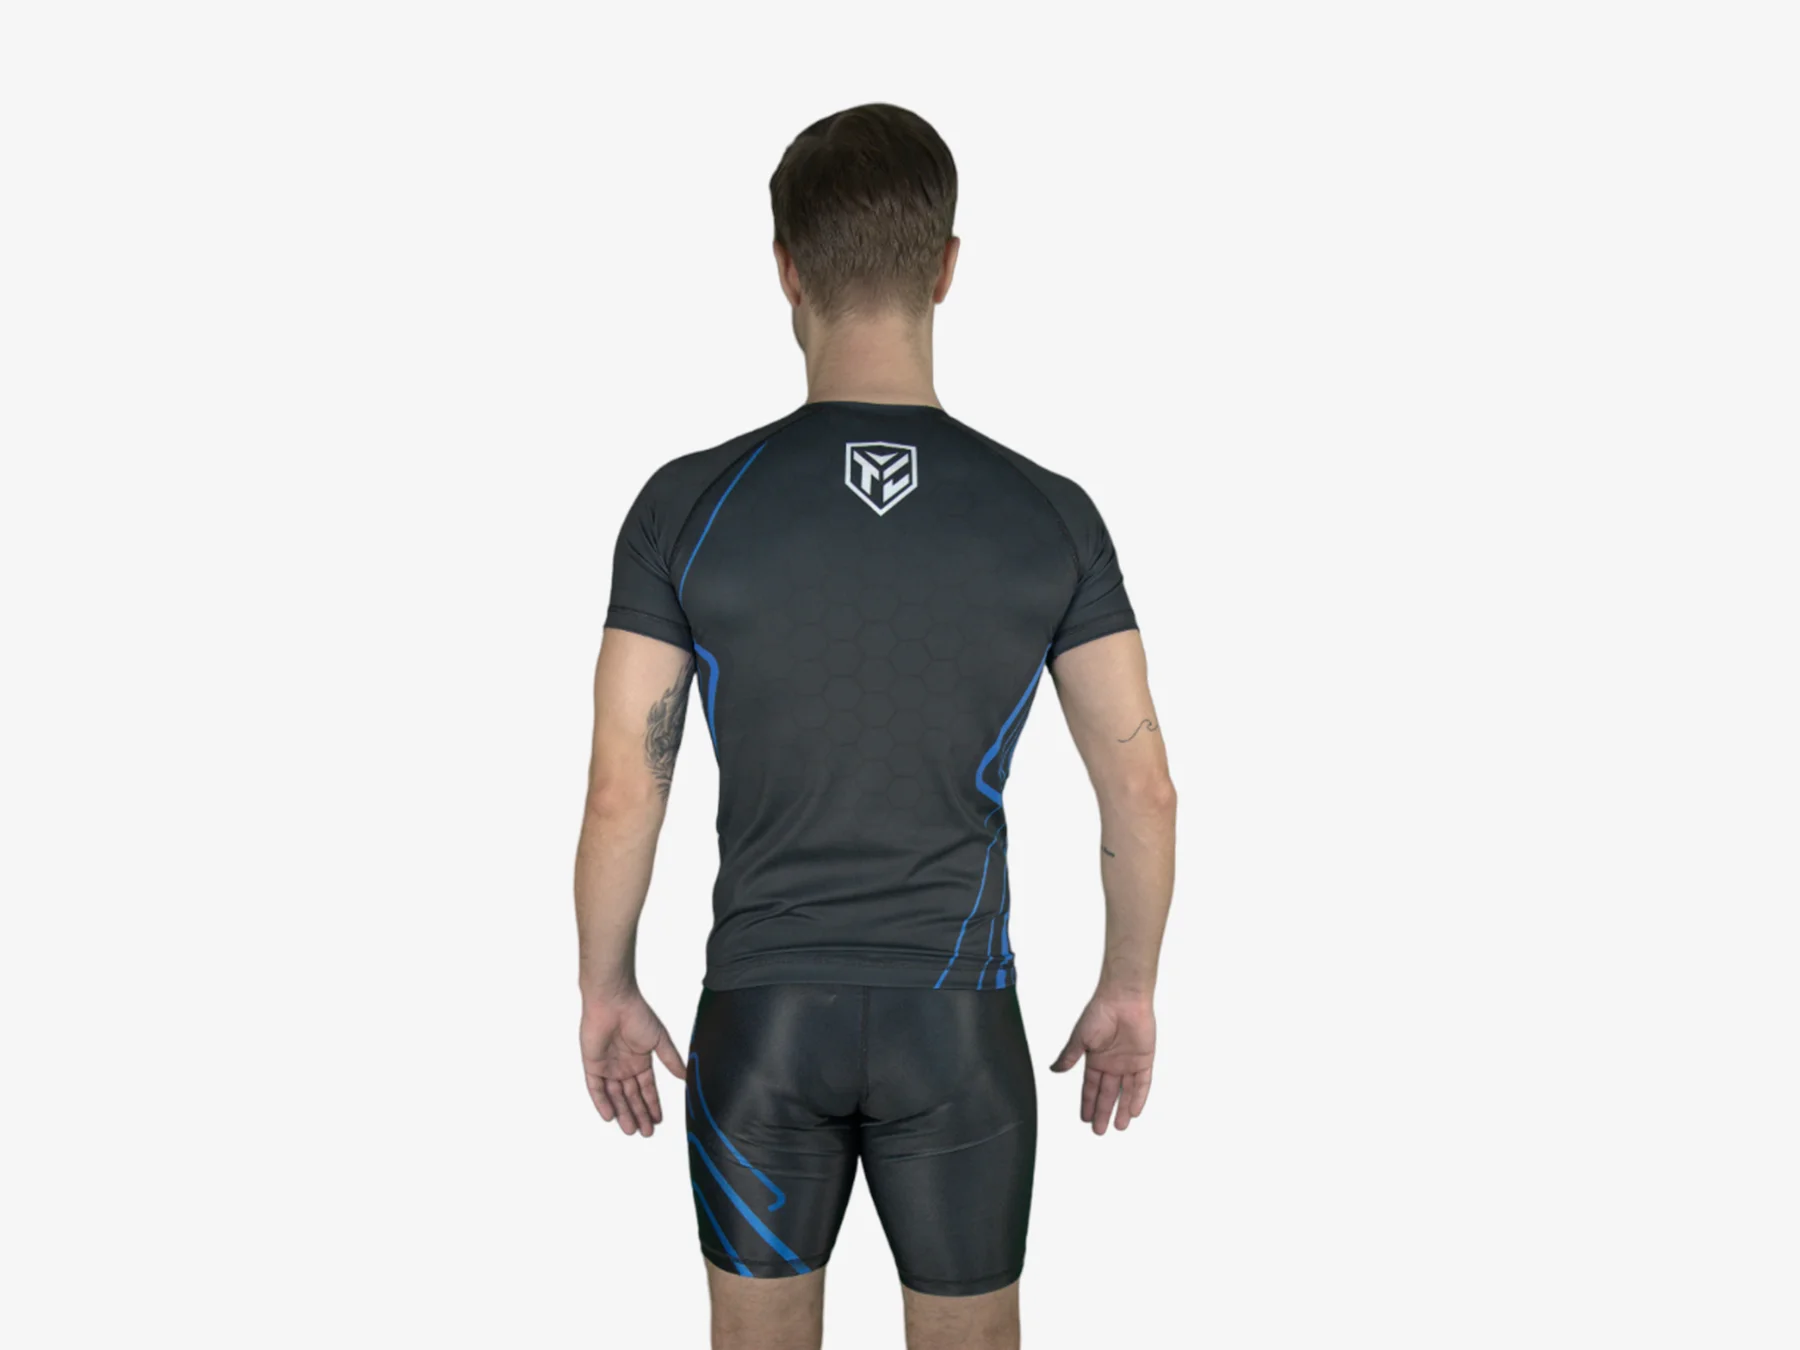 Tocayah octagon short compretion blue and black 7